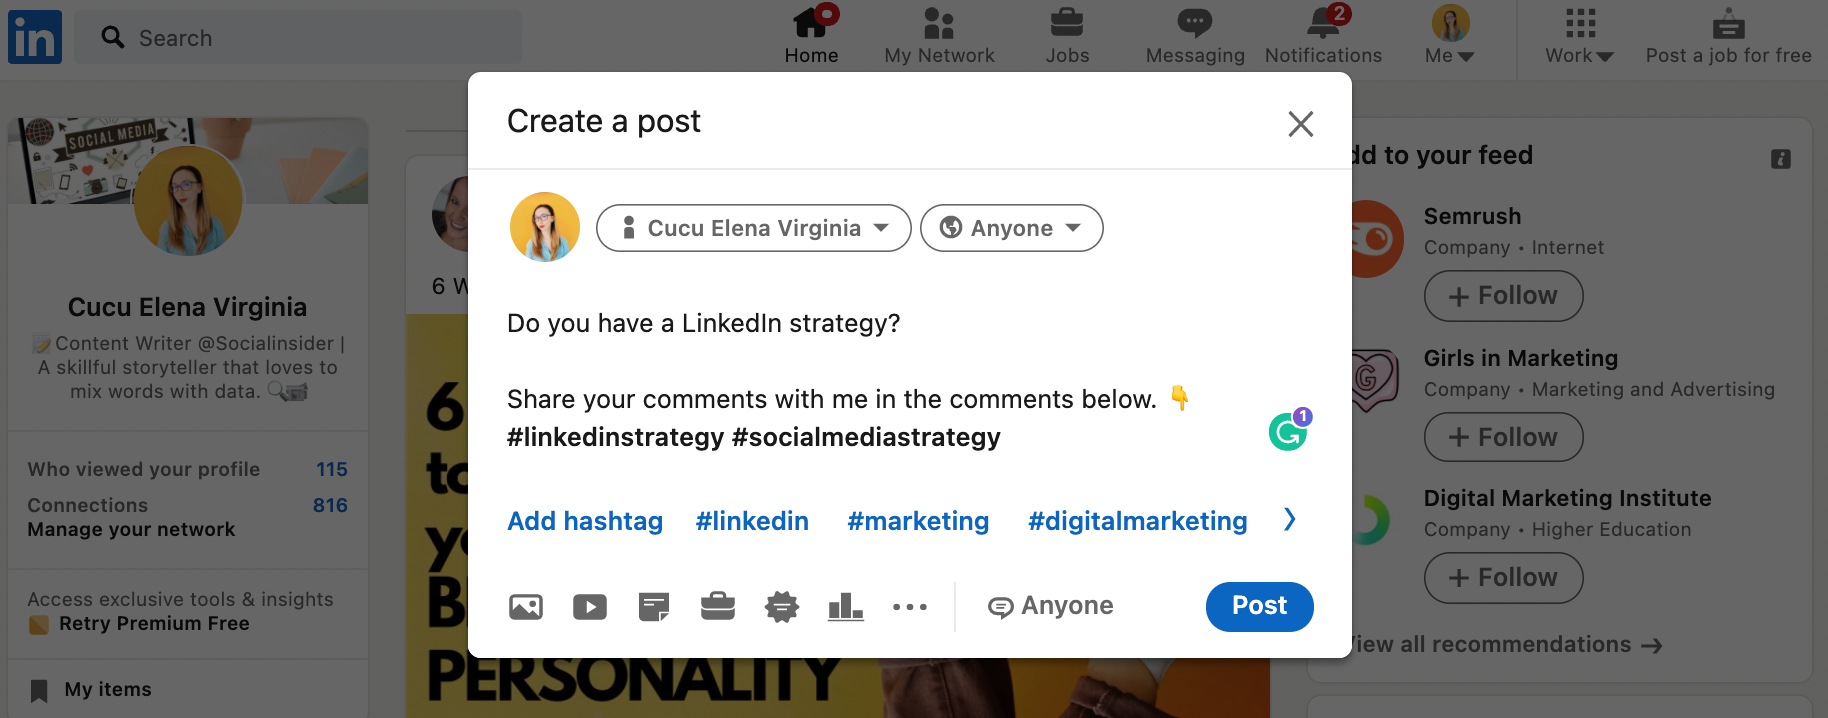 This is how you can share a post that has hashtags on LinkedIn